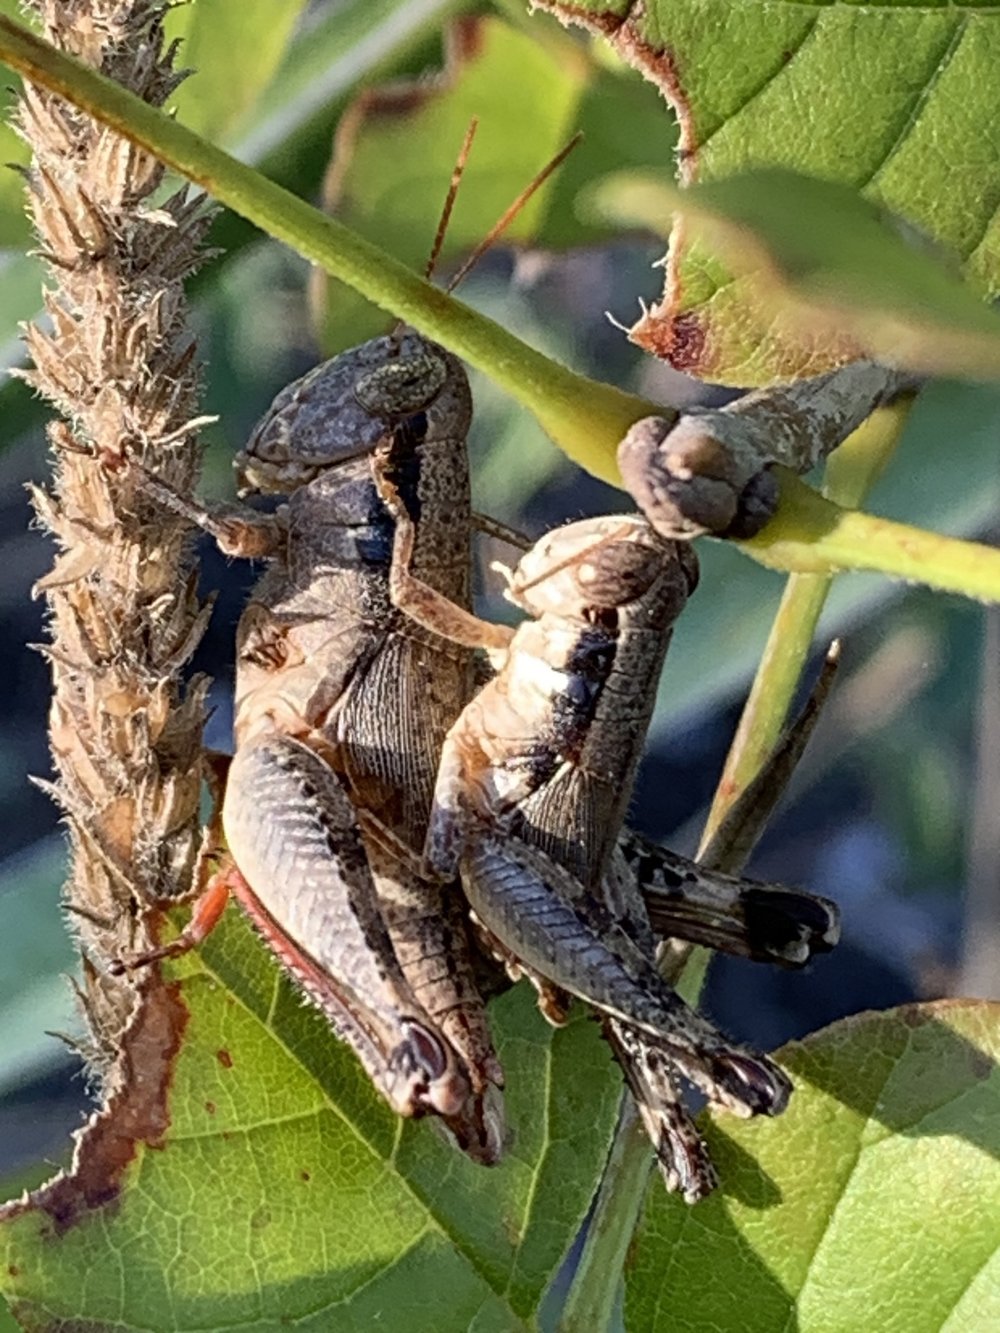   Aztec Spur-throated Grasshopper  ( Aidemona azteca ). Photo by, DY 